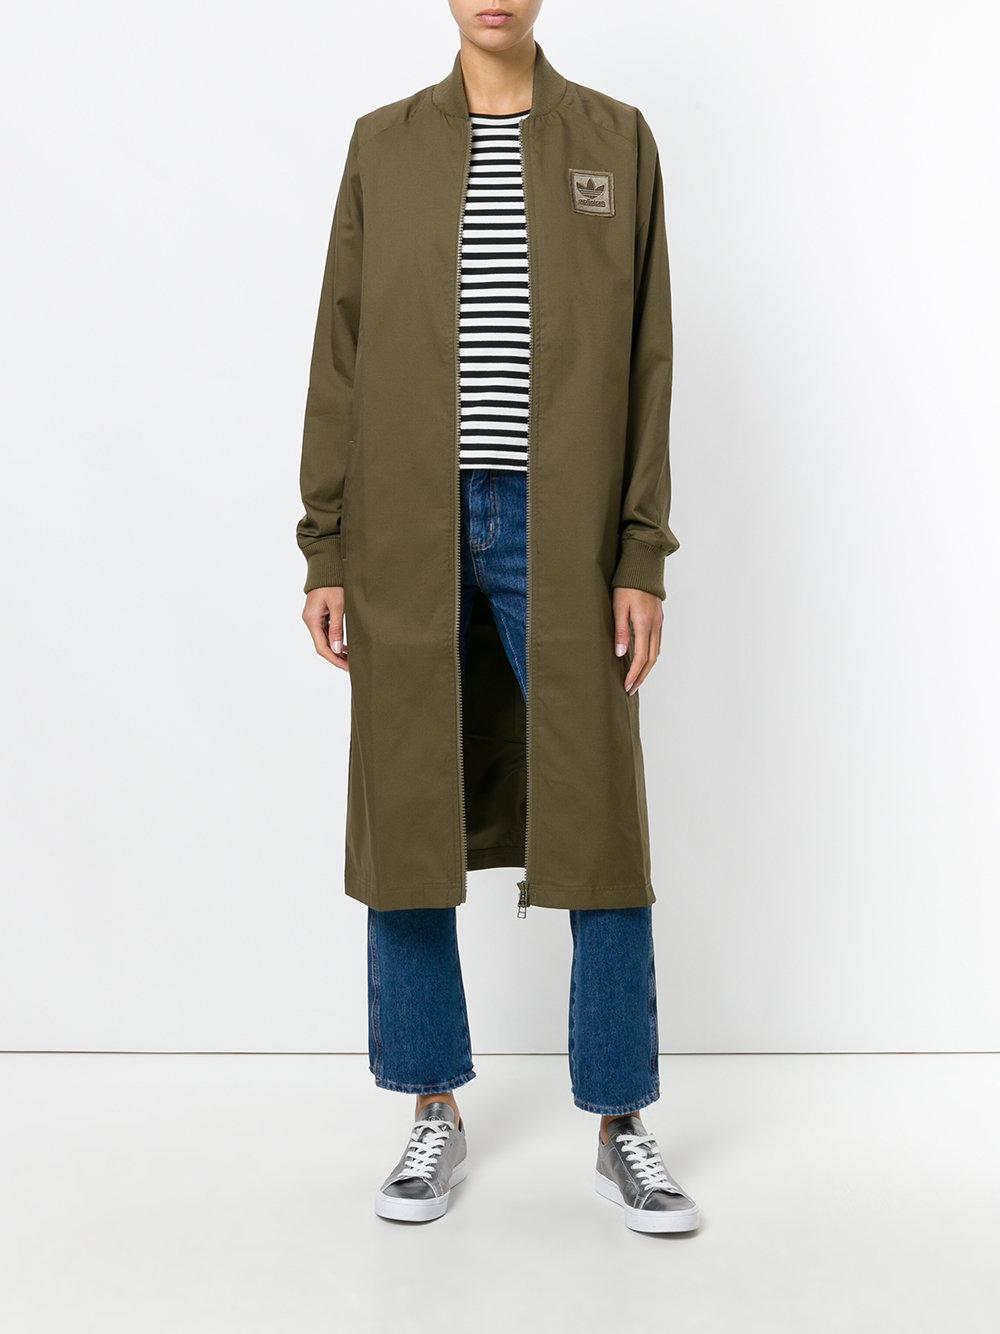 adidas Originals Cotton Extra Long Bomber Jacket in Green - Lyst